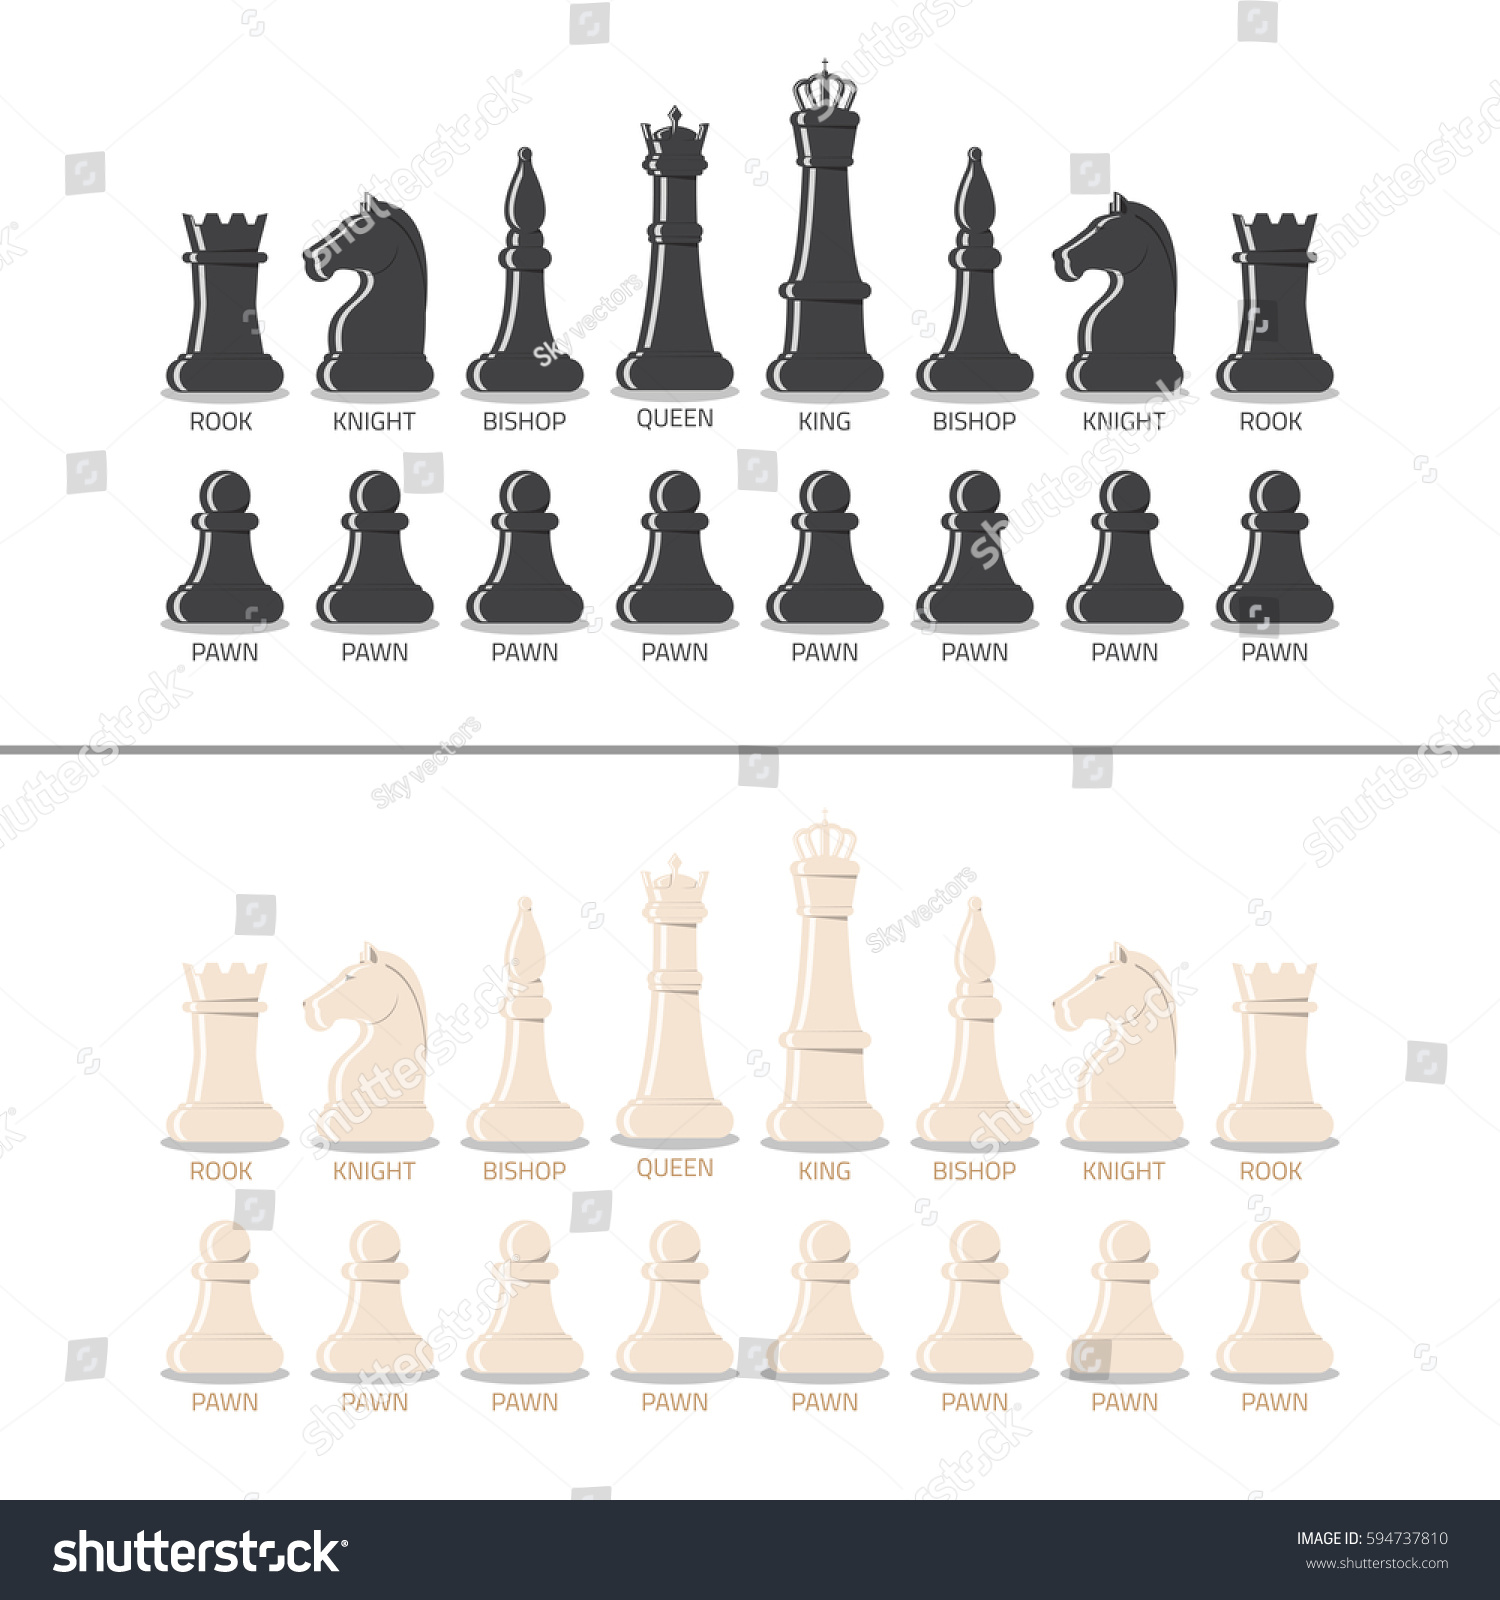 SVG of All chess pieces, black and white, from pawn to king and queen. Flat style vector illustration. svg